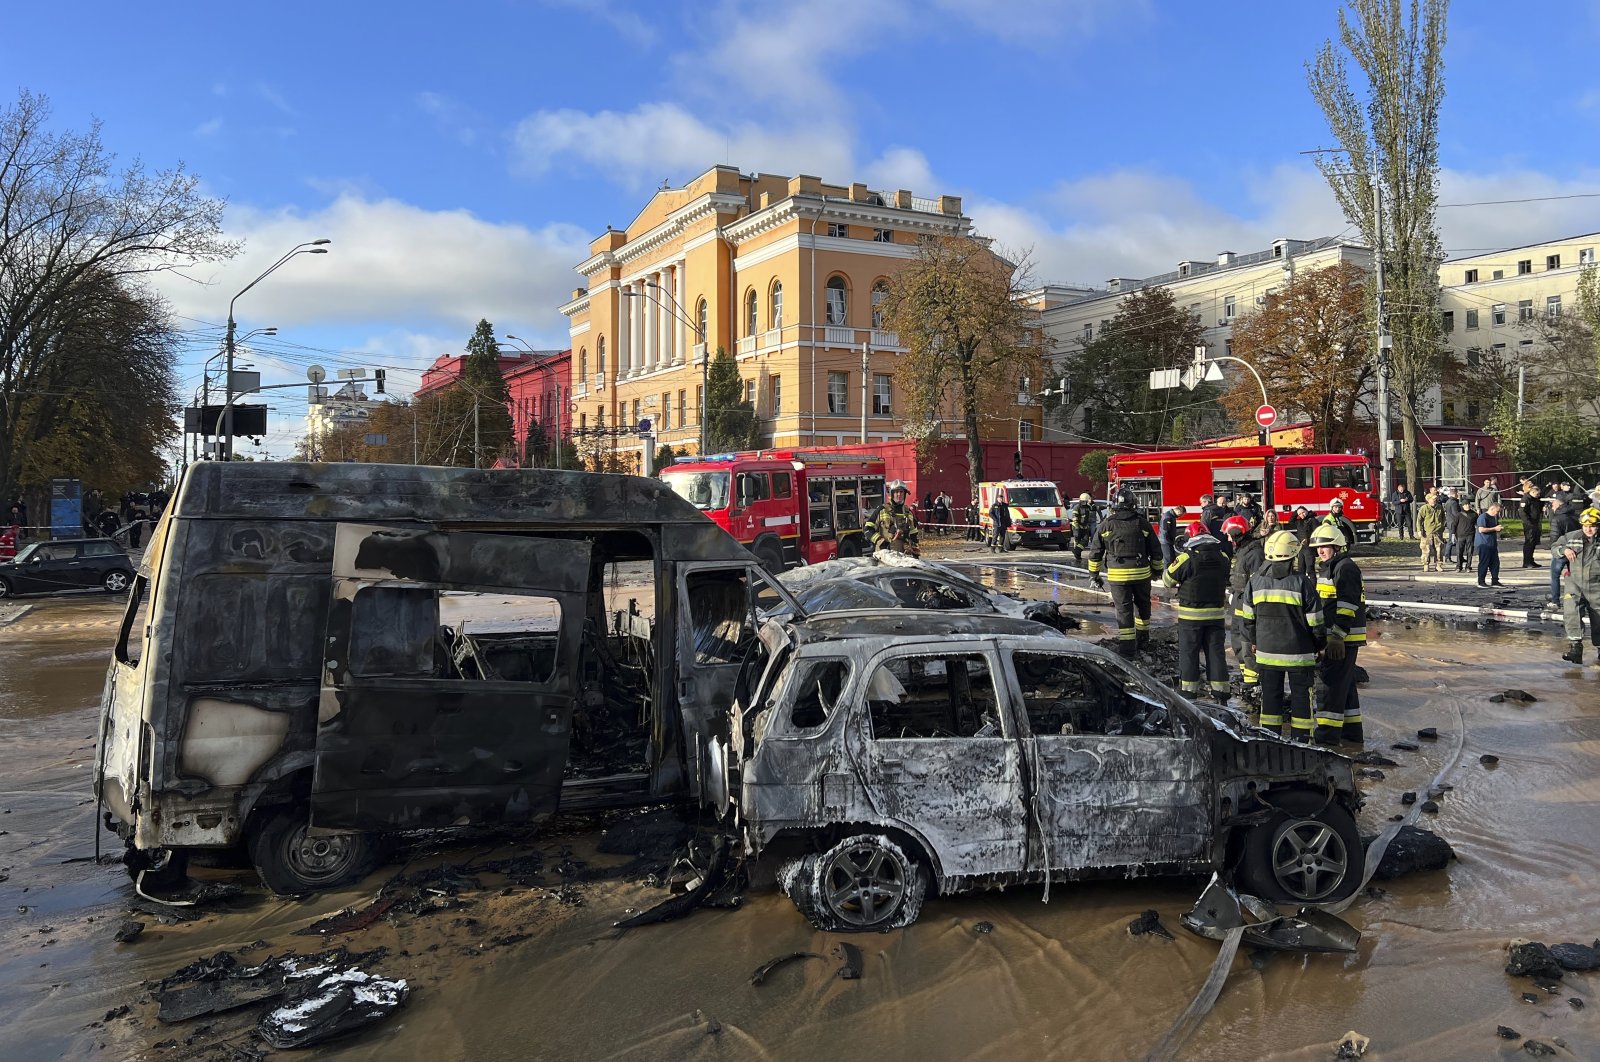 Rescue workers survey the scene of a Russian attack on Kyiv, Ukraine, Oct. 10, 2022. (AP Photo)